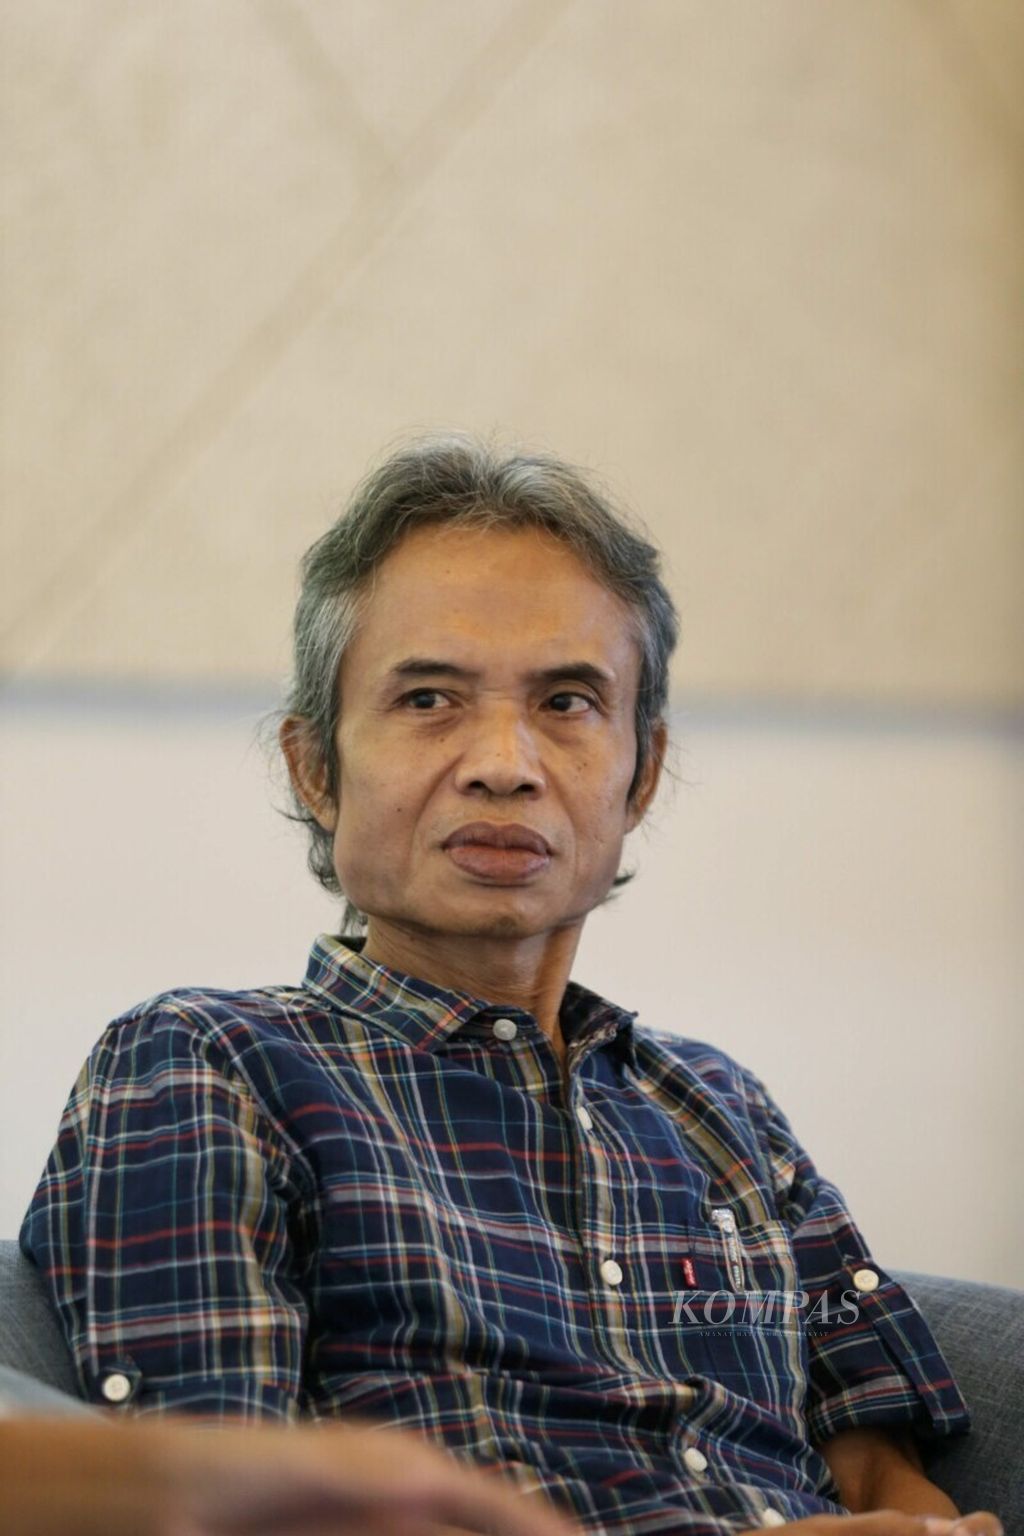 Writer Joko Pinurbo during a visit to the <i>Kompas</i> editorial board in Jakarta on June 28 2019.